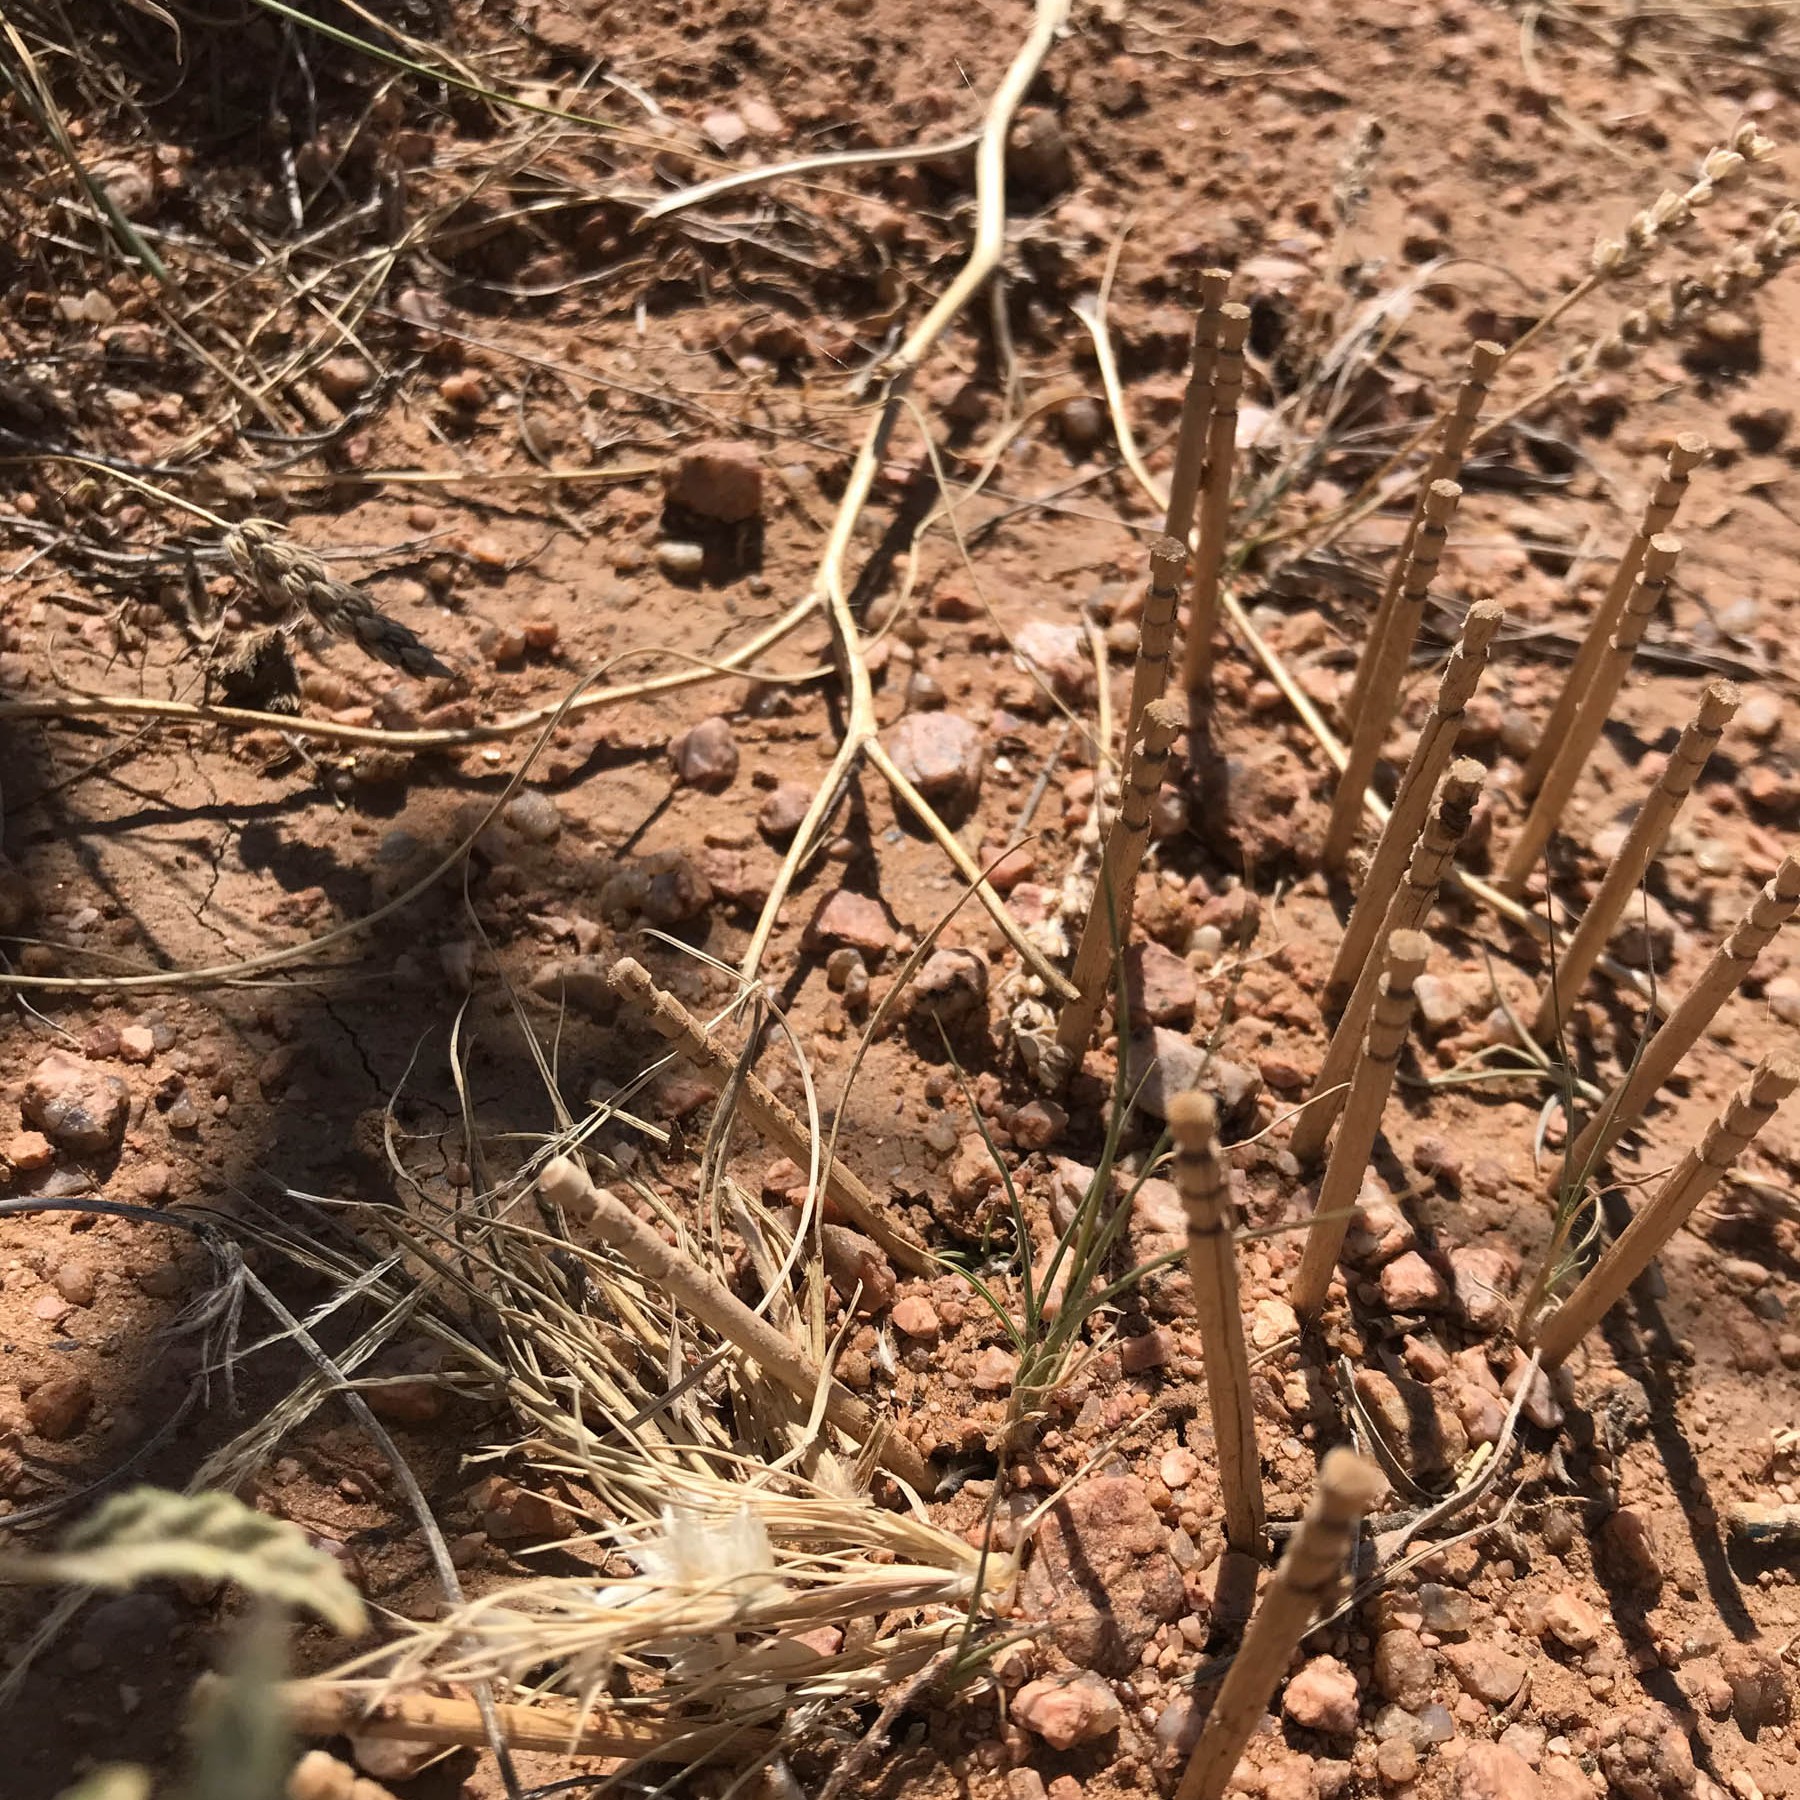 A grid of toothpicks sticking upright out of desert soil, with a grass seedling growing between them.